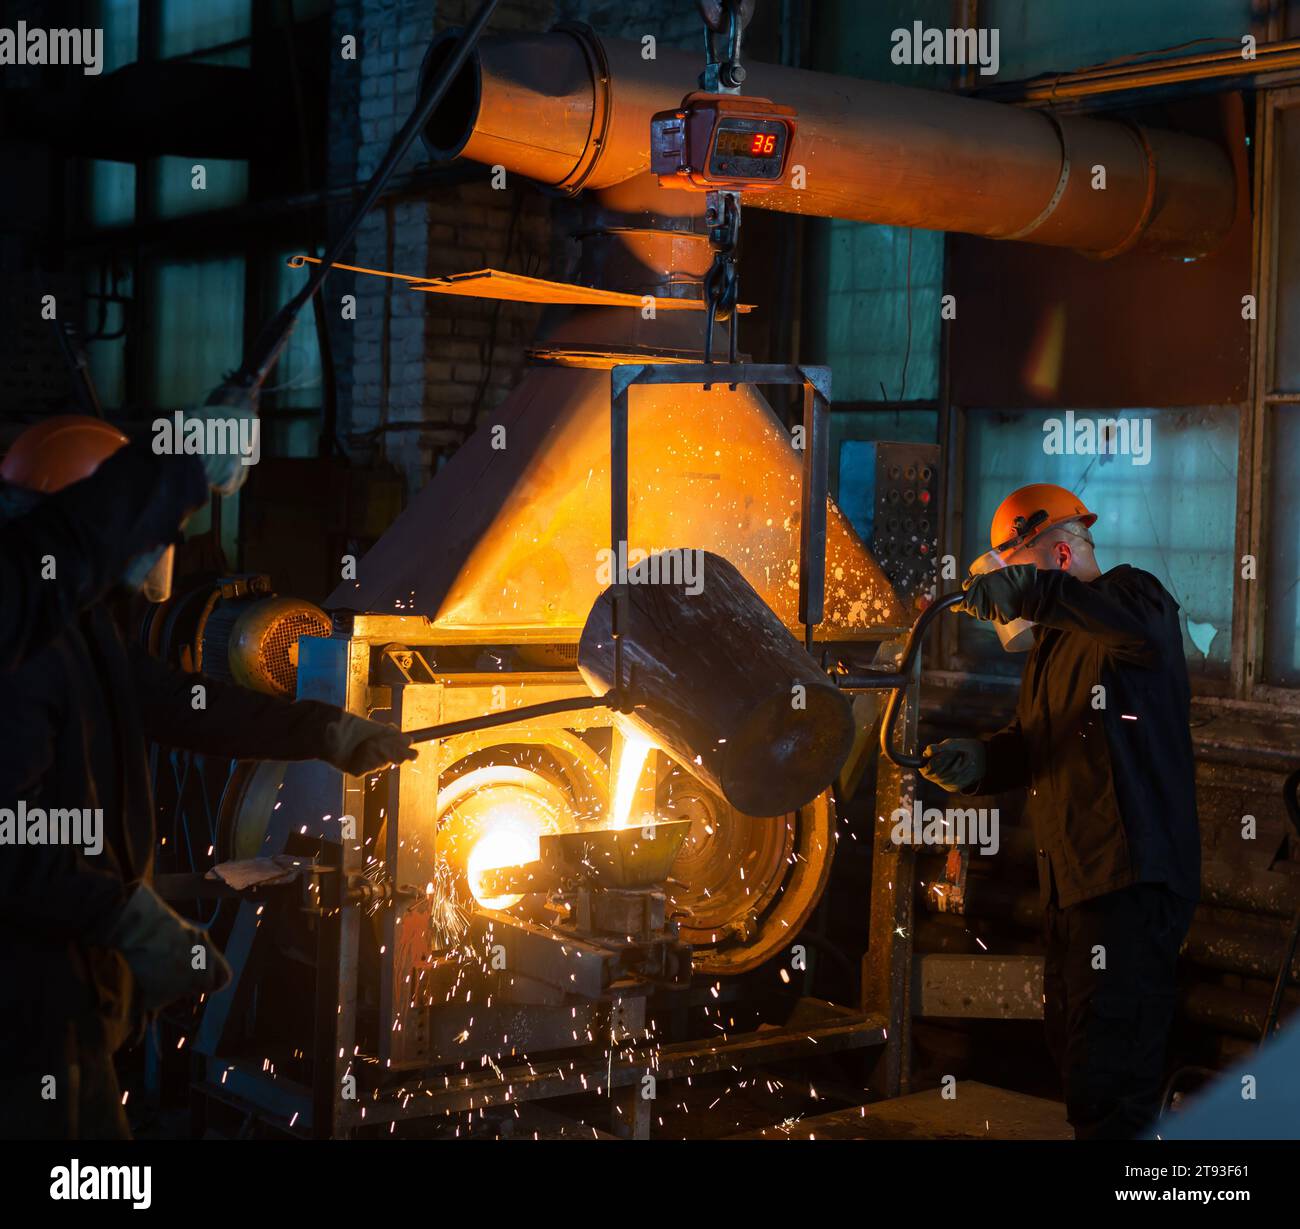 Pouring molten metal into a centrifugal machine in the foundry shop of metallurgical plant Stock Photo